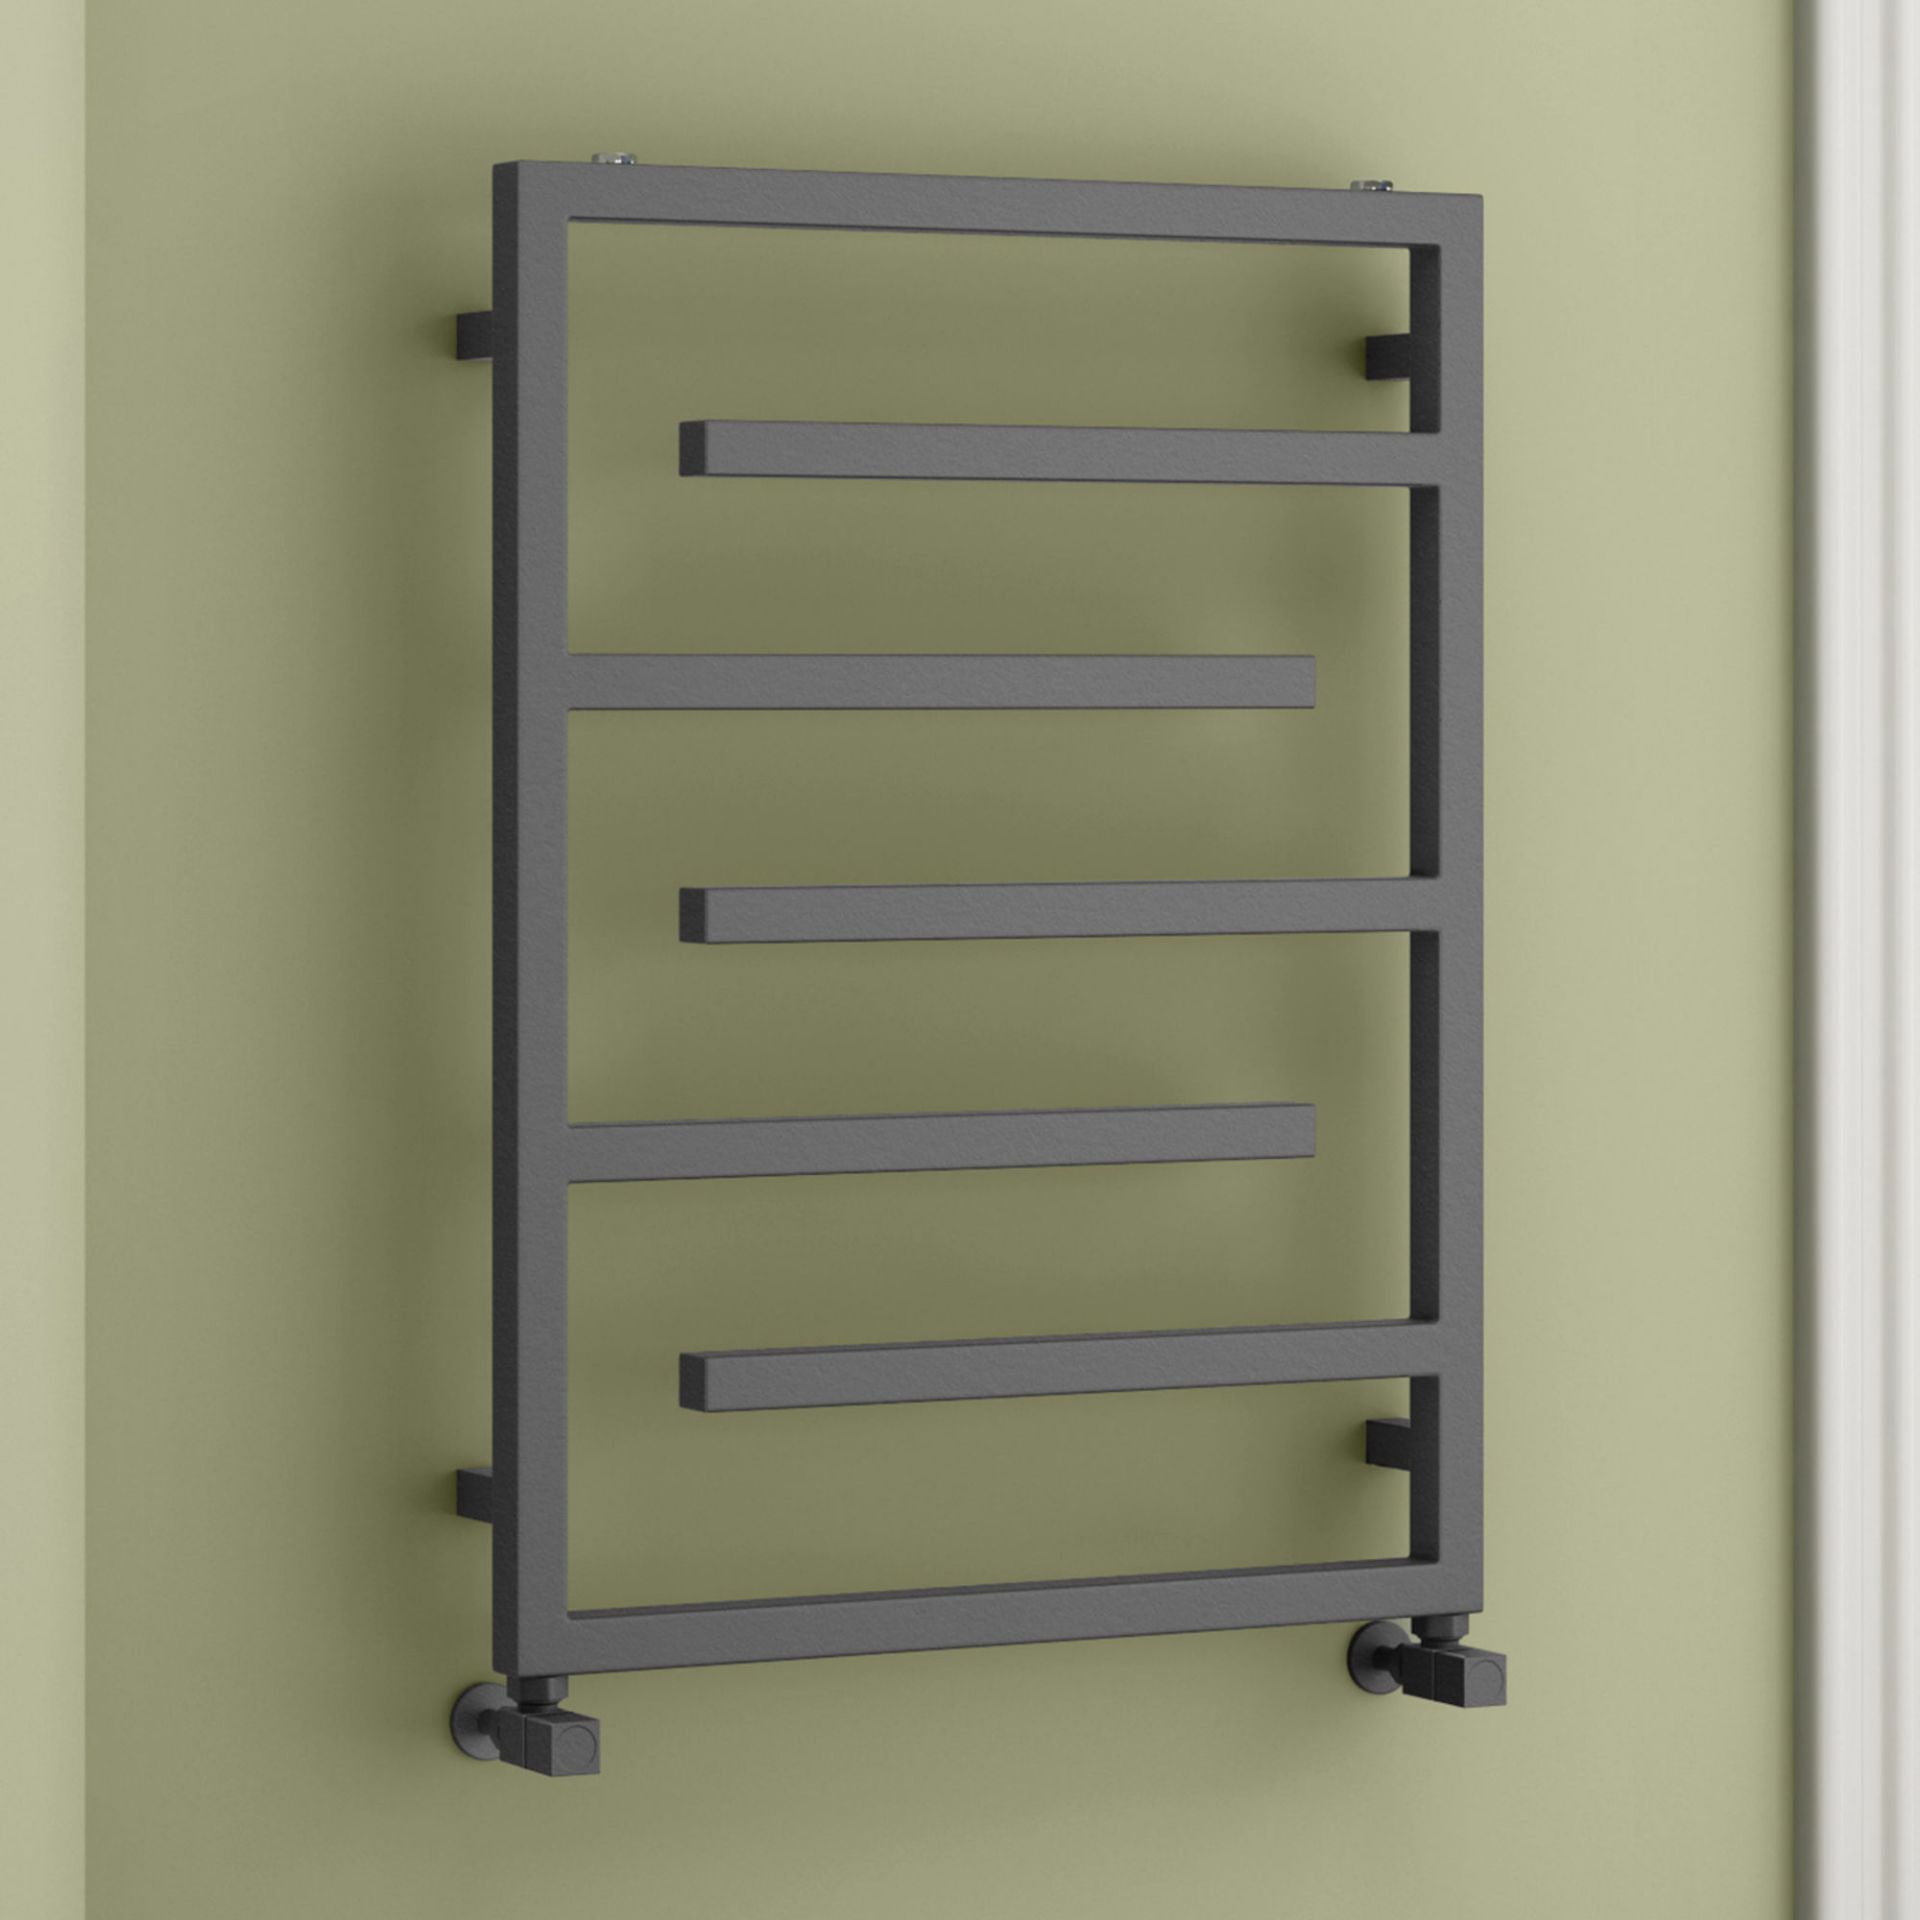 (OS17) 800 x 600mm Anthracite Designer Square Rail Towel Radiator. RRP £434.99. Constructed from